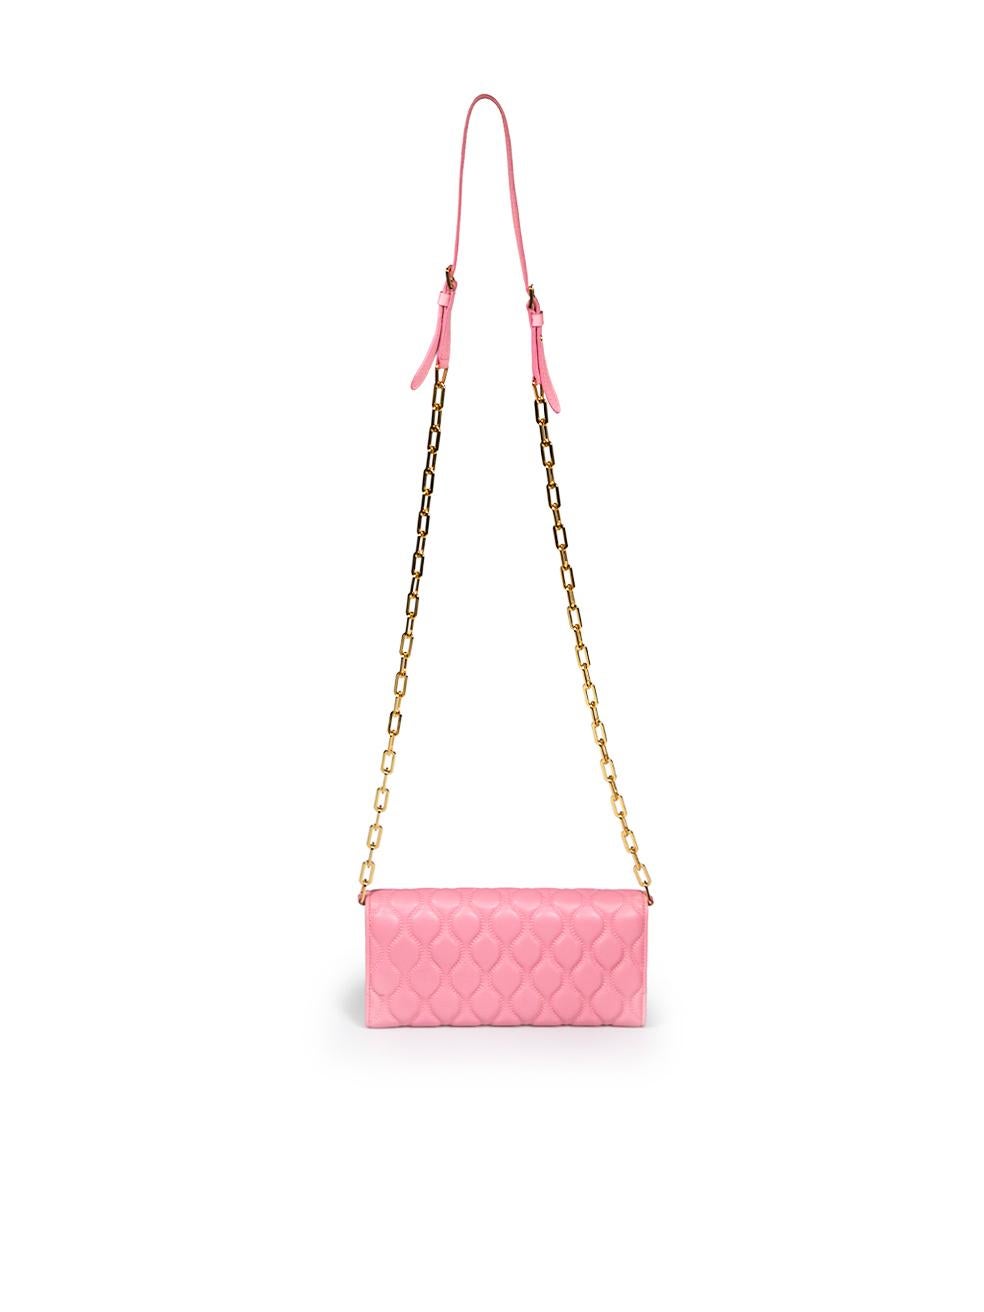 Miu Miu Pink Leather Quilted Wallet on Chain In New Condition For Sale In London, GB